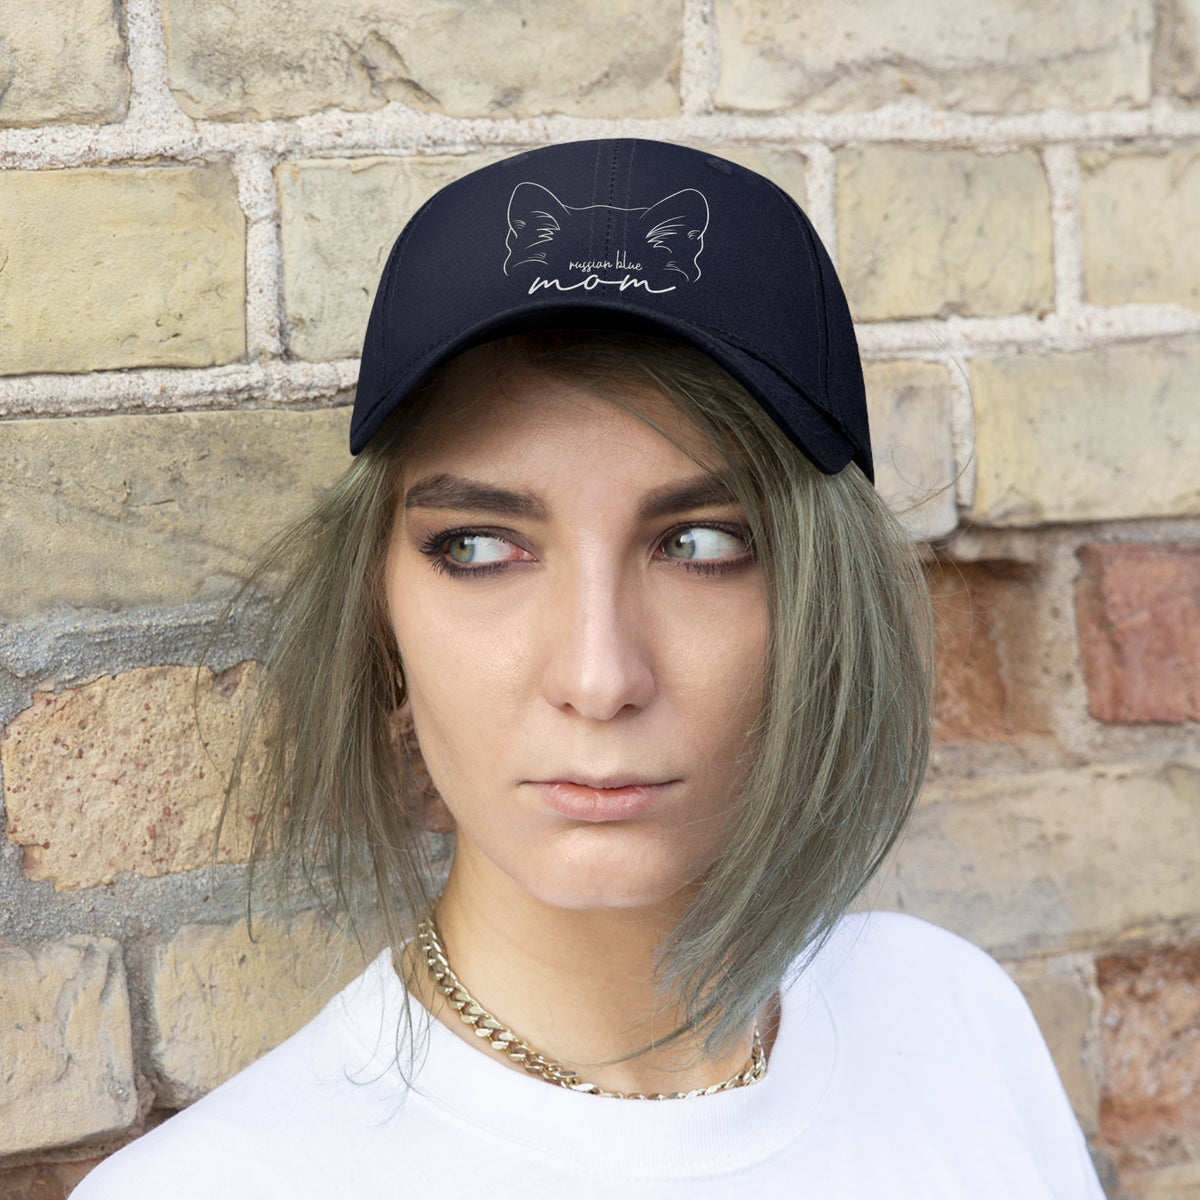 Russian Blue Cat Mom Embroidered Twill Hat